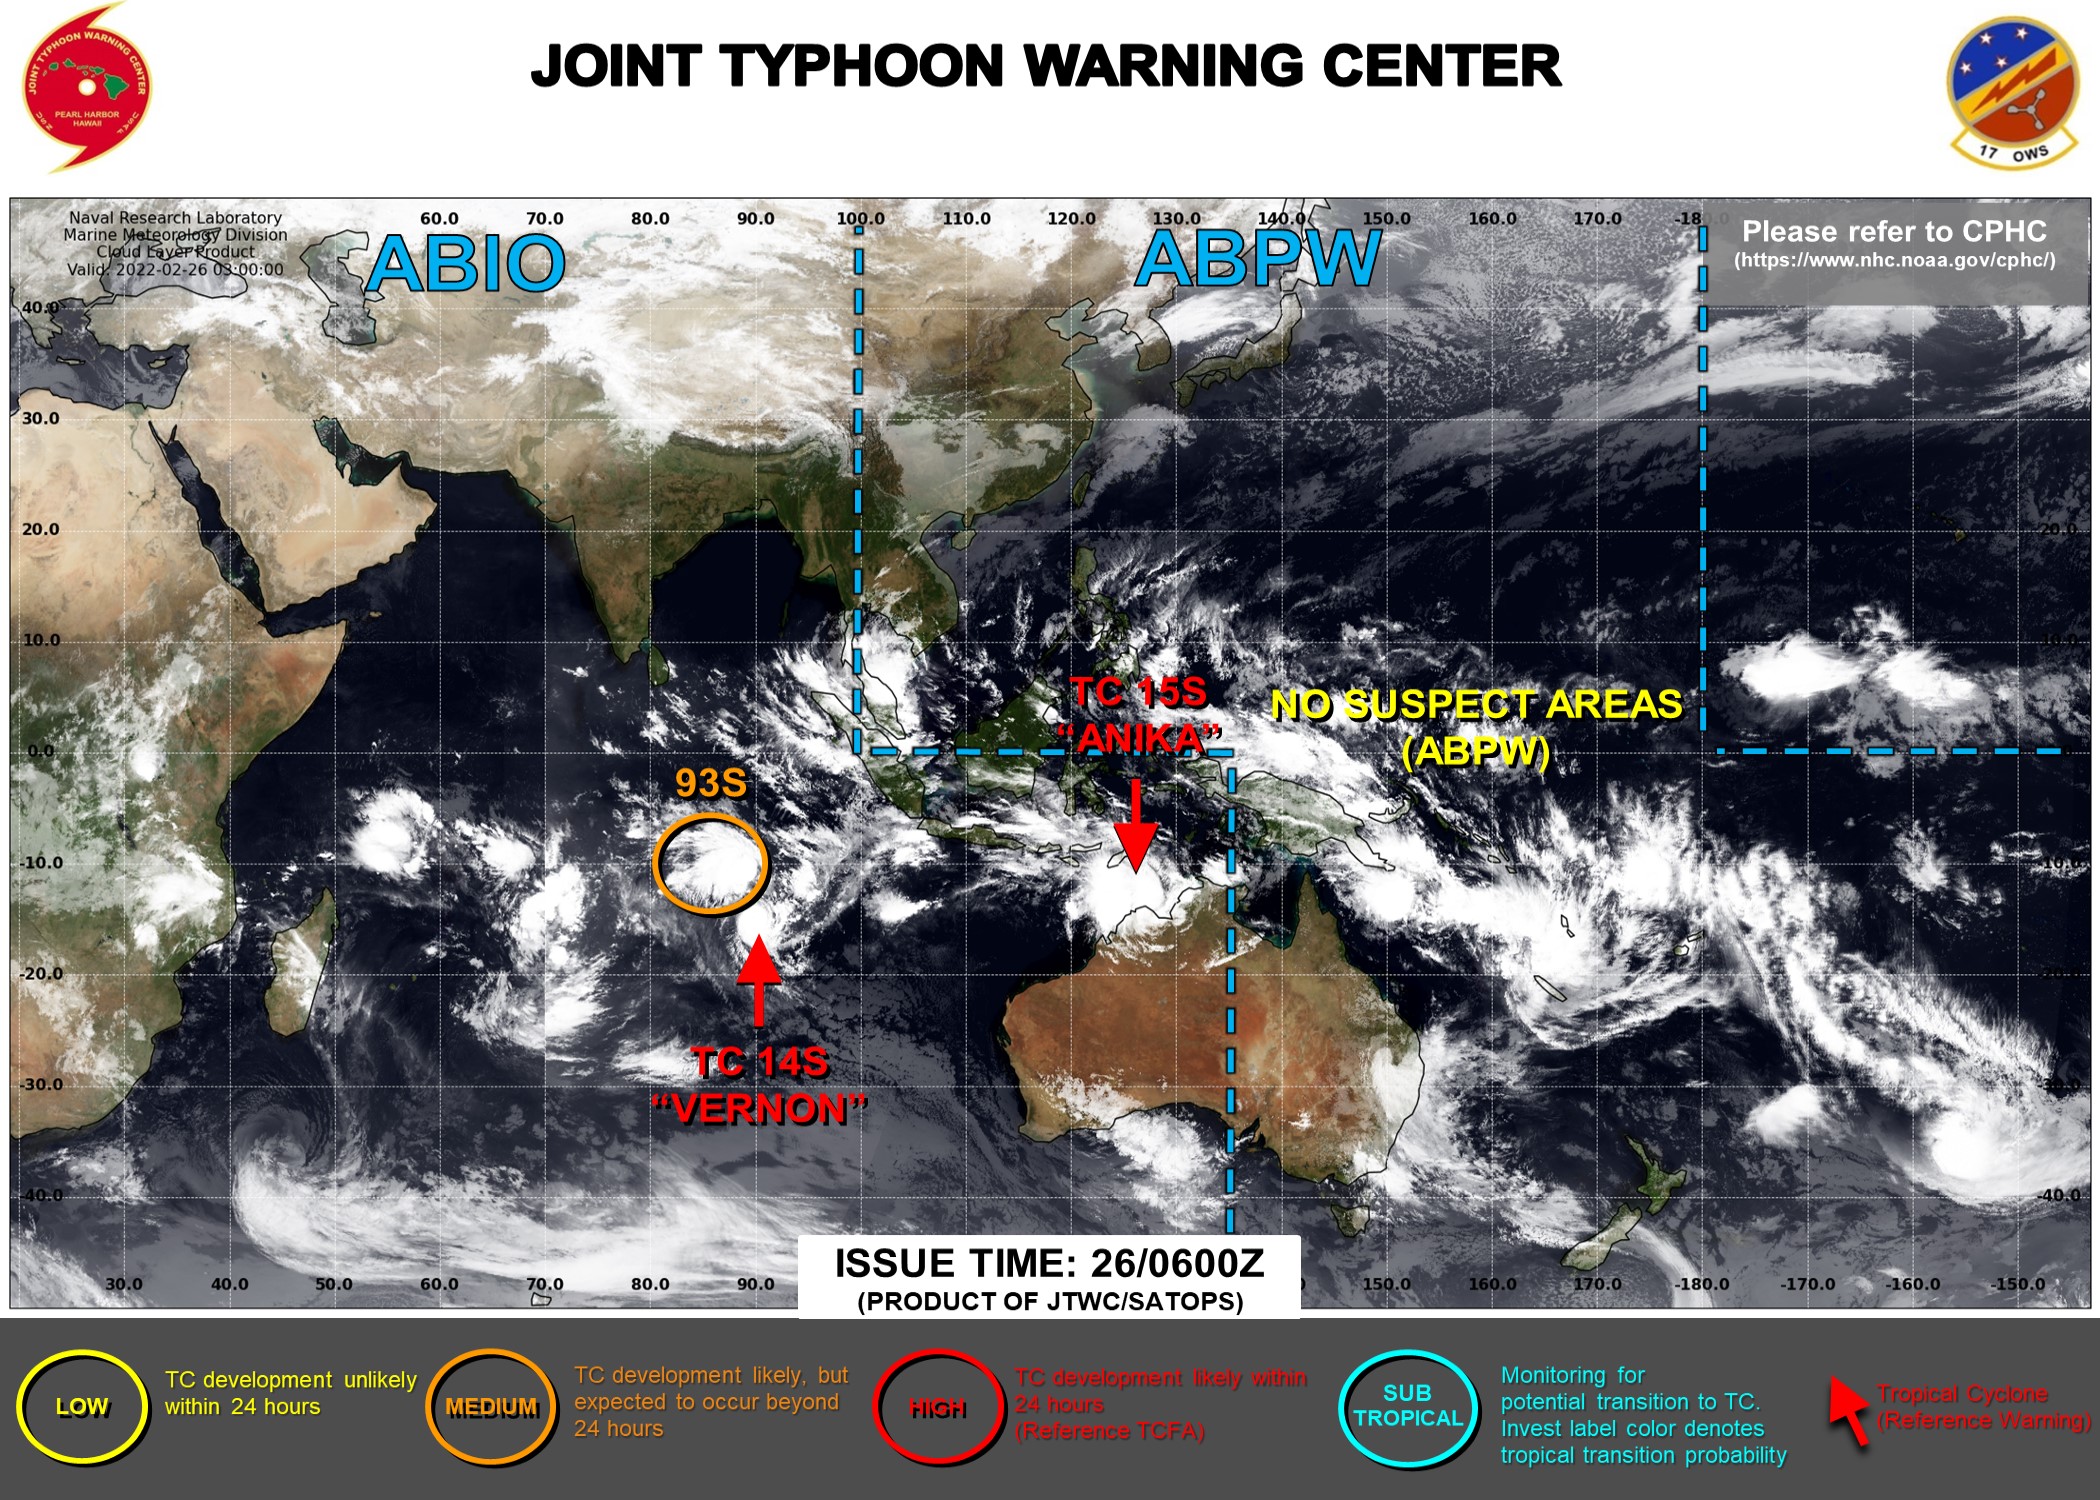 JTWC IS ISSUING 12HOURLY WARNINGS ON TC 14S(VERNON) AND 6HOURLY WARNINGS ON TC 15S. 3HOURLY SATELLITE BULLETINS ARE ISSUED ON 14S,15S, INVEST 93S AND INVEST 98P.